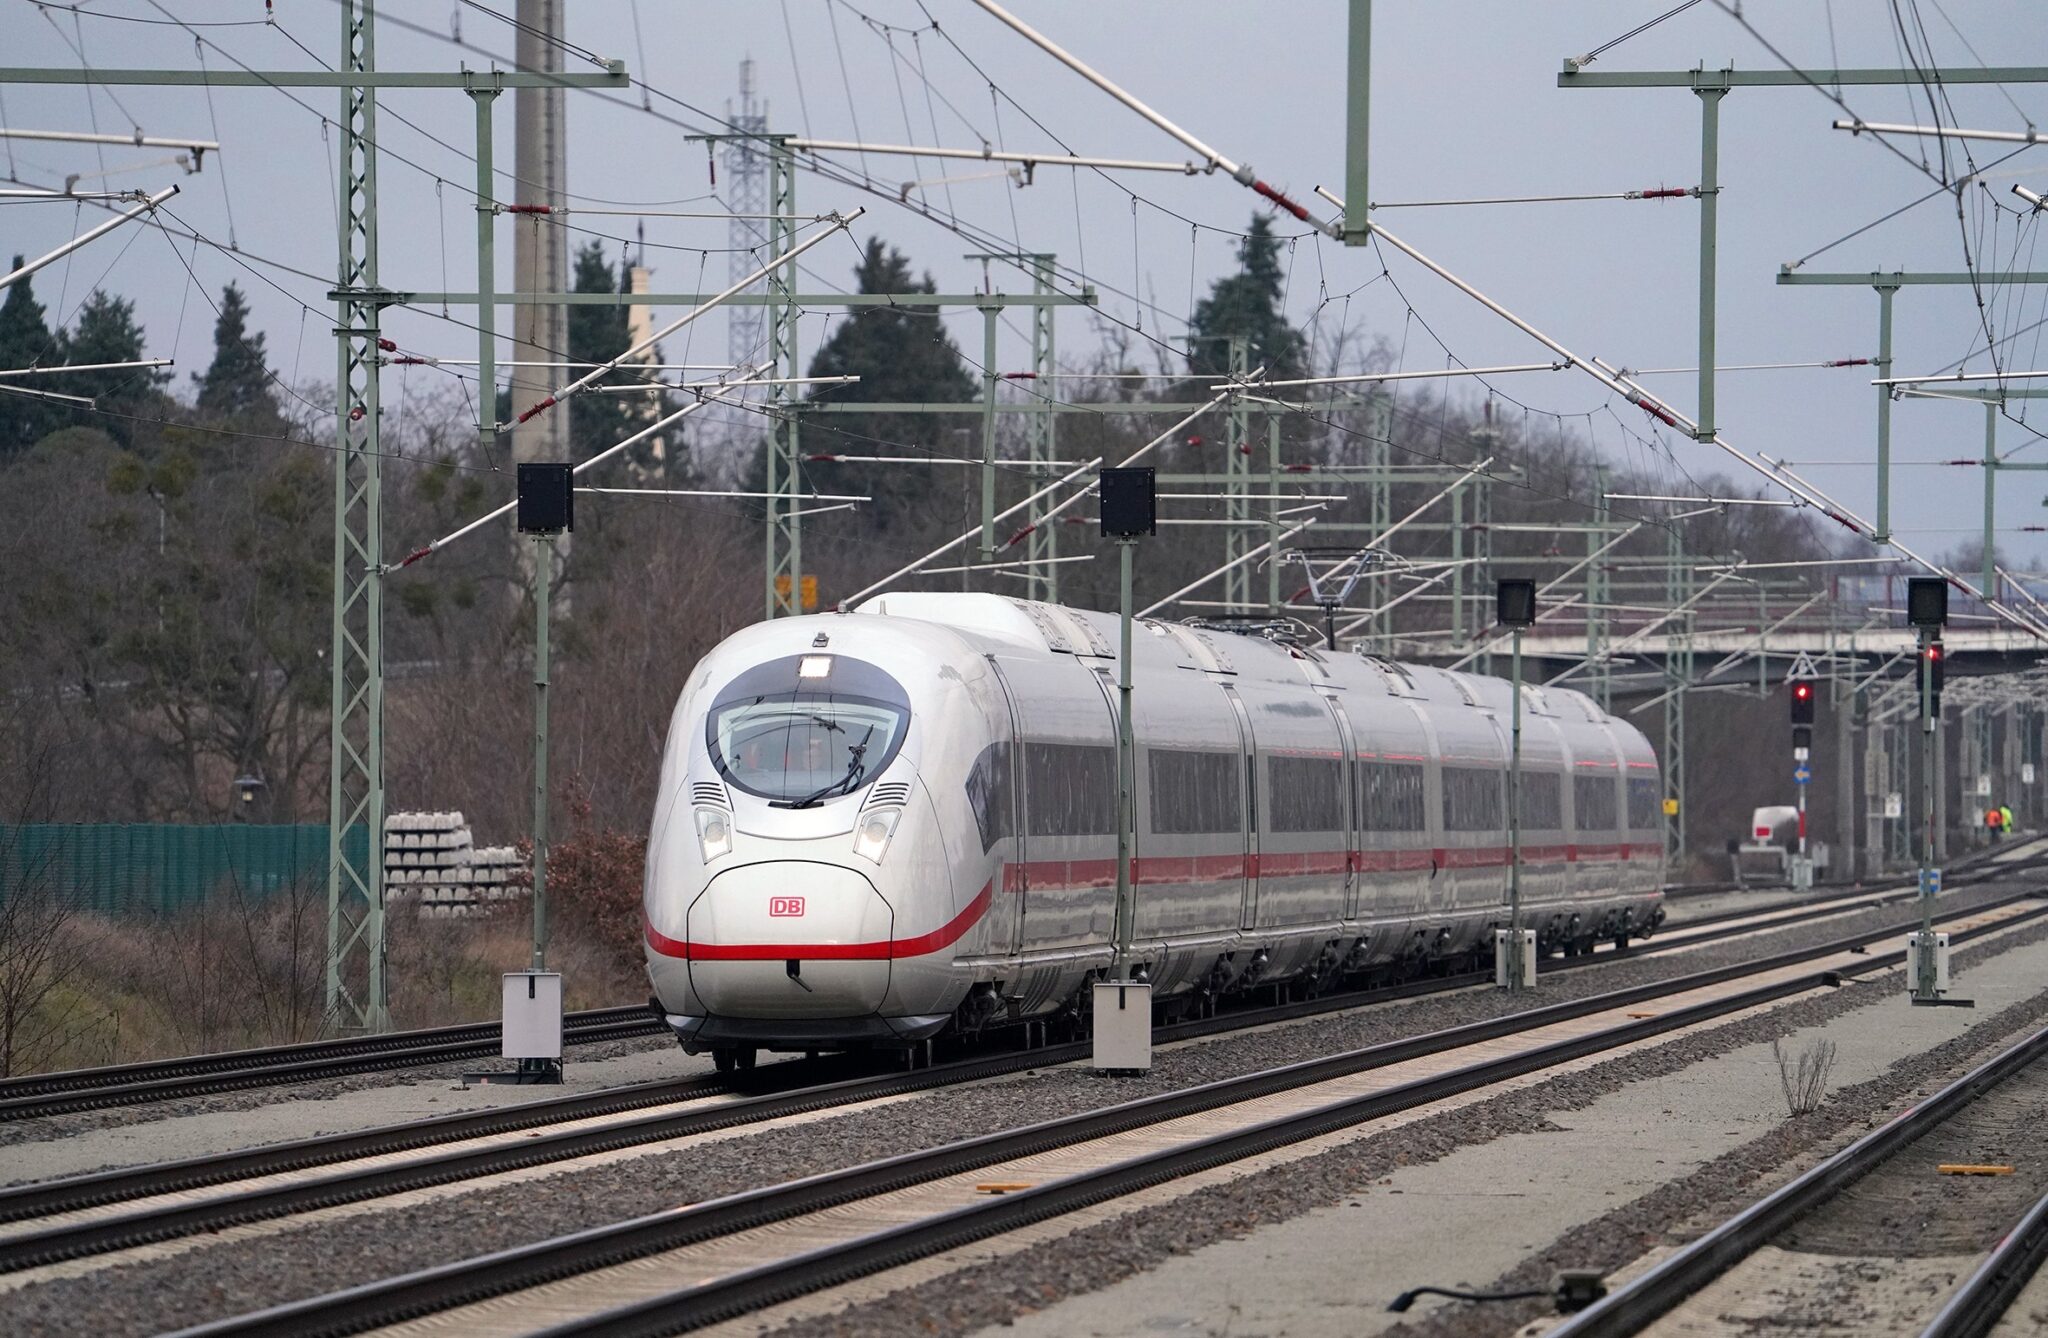 The first Velaro MS (ICE 3neo) high-speed train by Siemens Mobility on trials